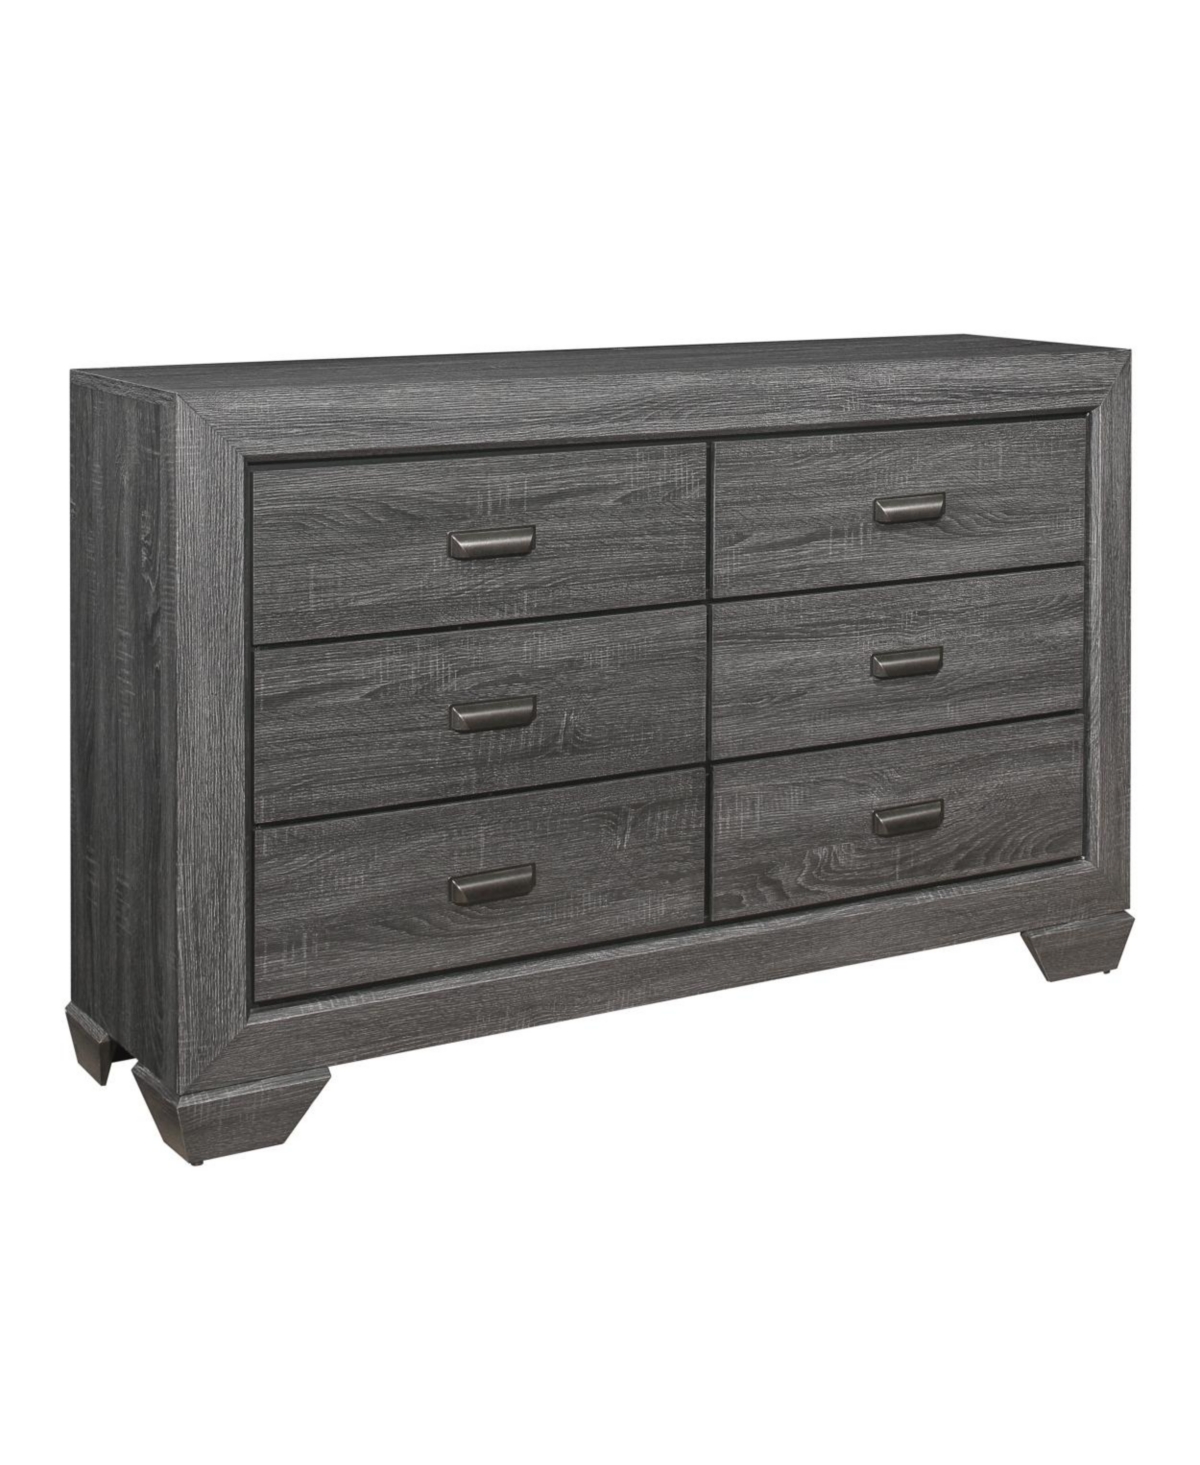 Wooden Bedroom Furniture Gray Finish 1 Piece Dresser Of 6X Drawers Contemporary Design Rustic Aesthetic - Grey